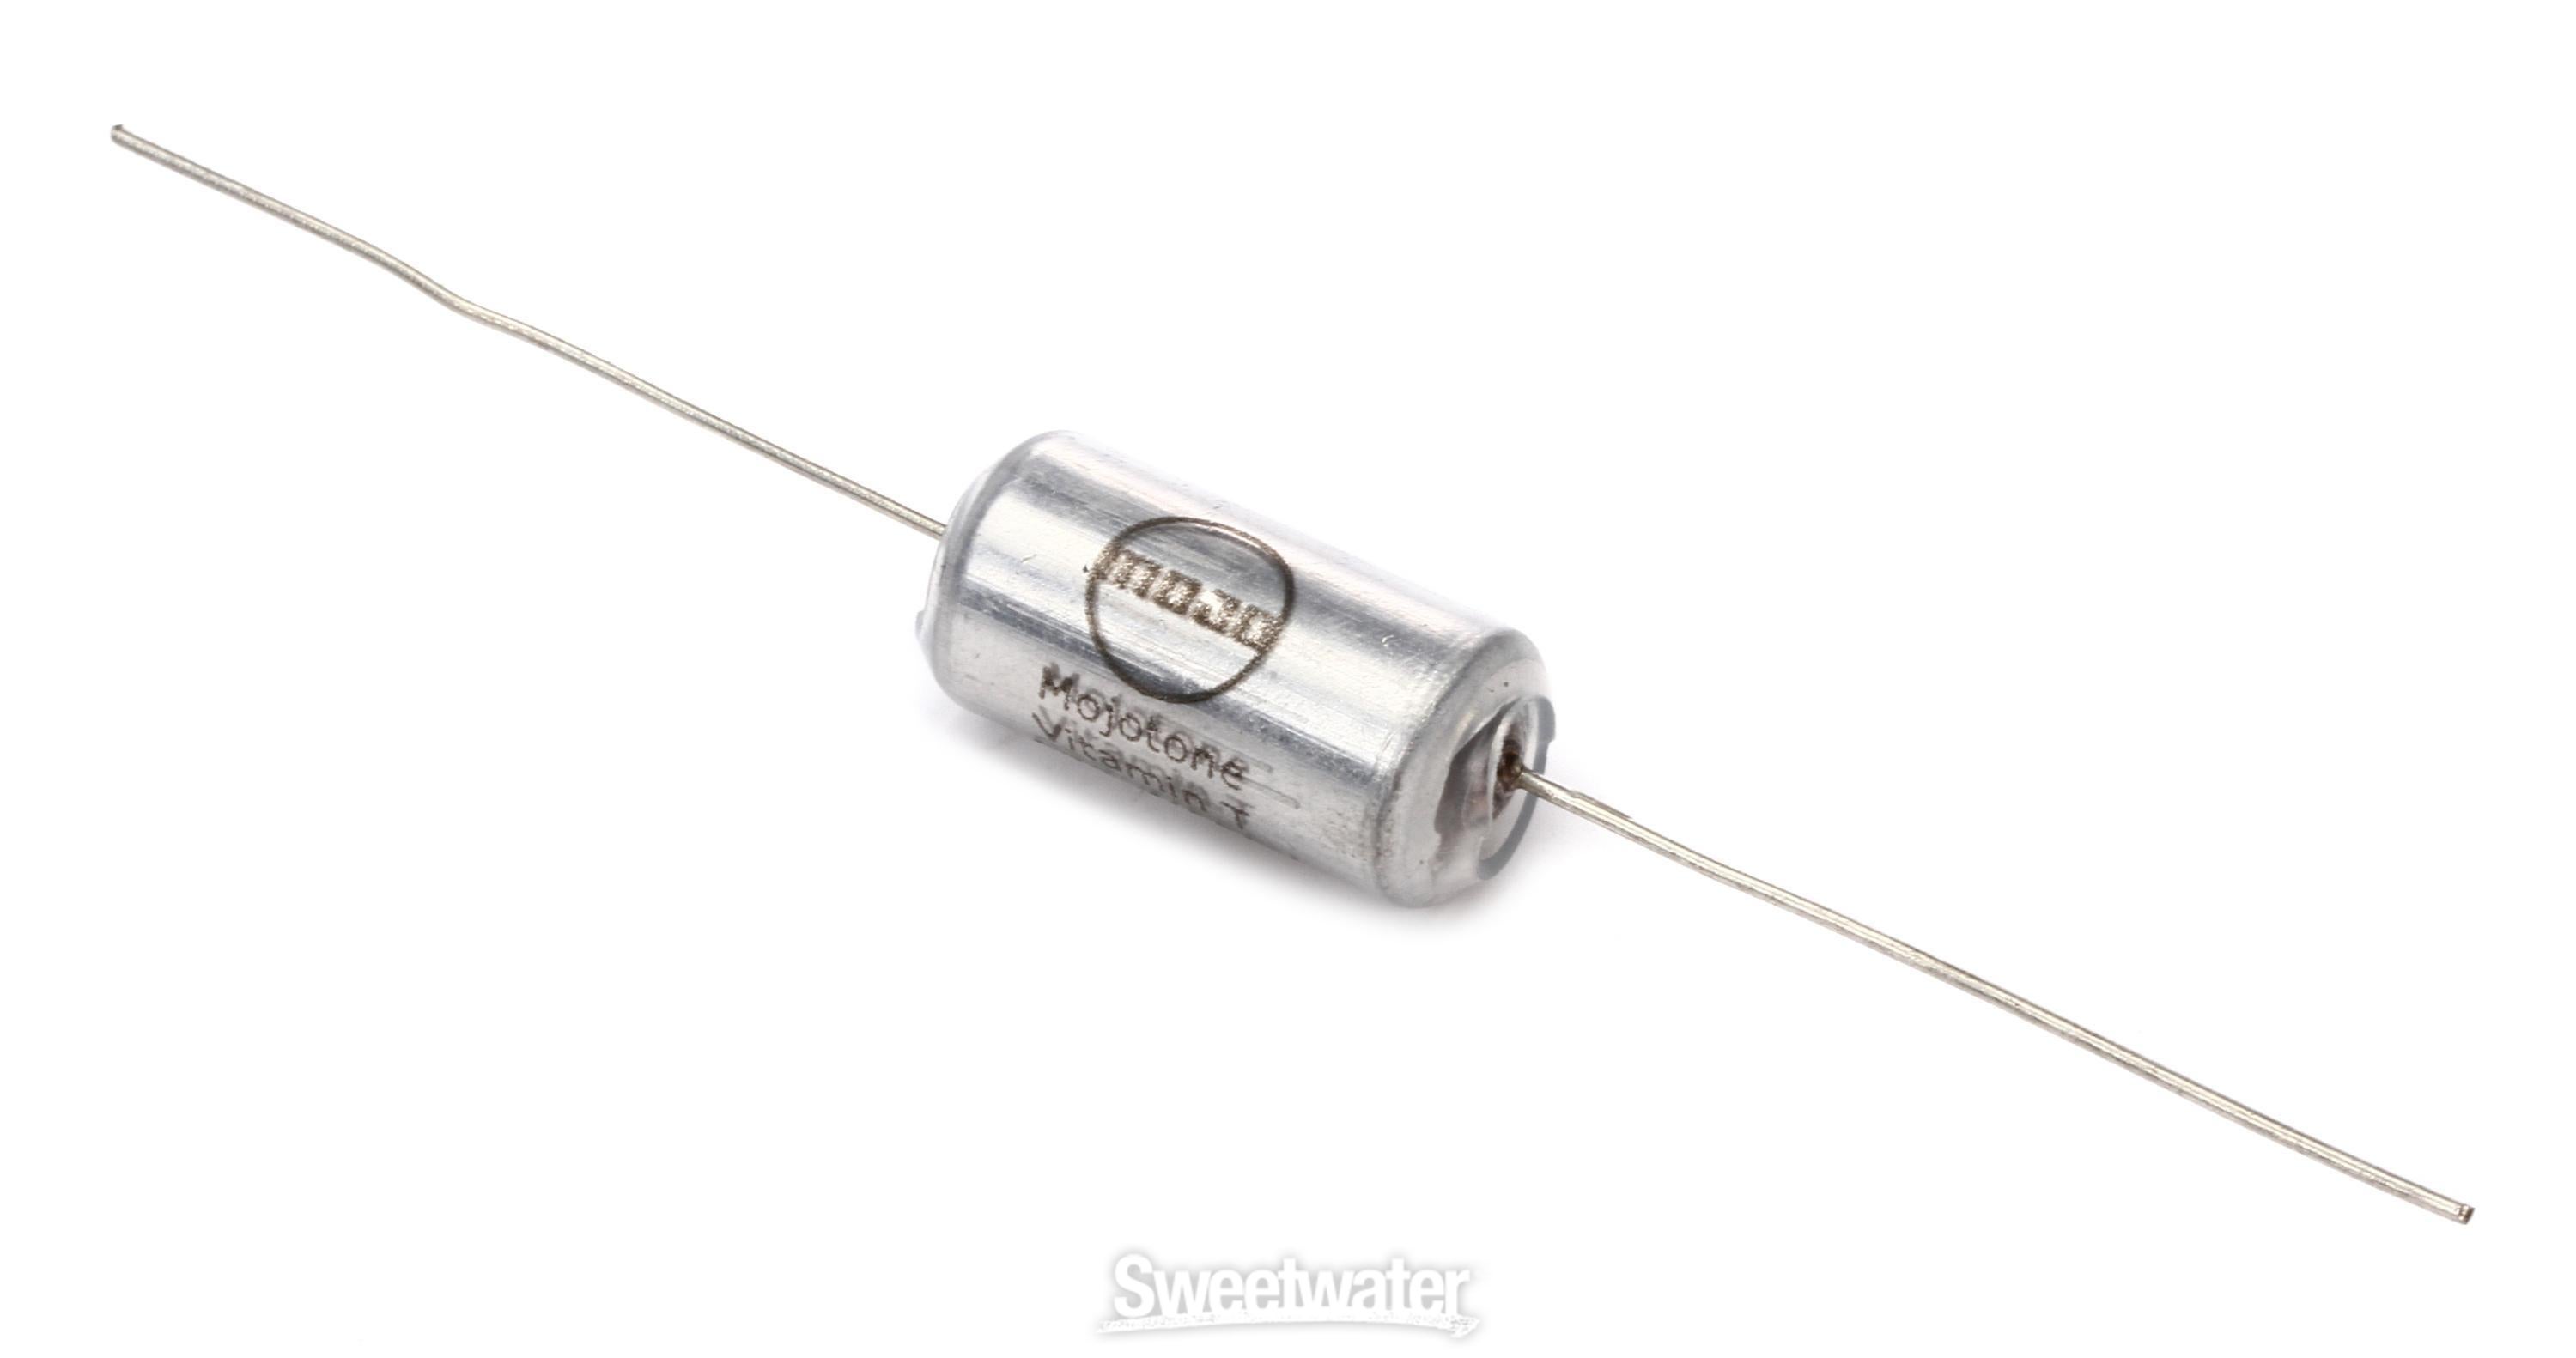 Mojotone Vitamin T .022uf Paper In Oil Capacitor Reviews | Sweetwater